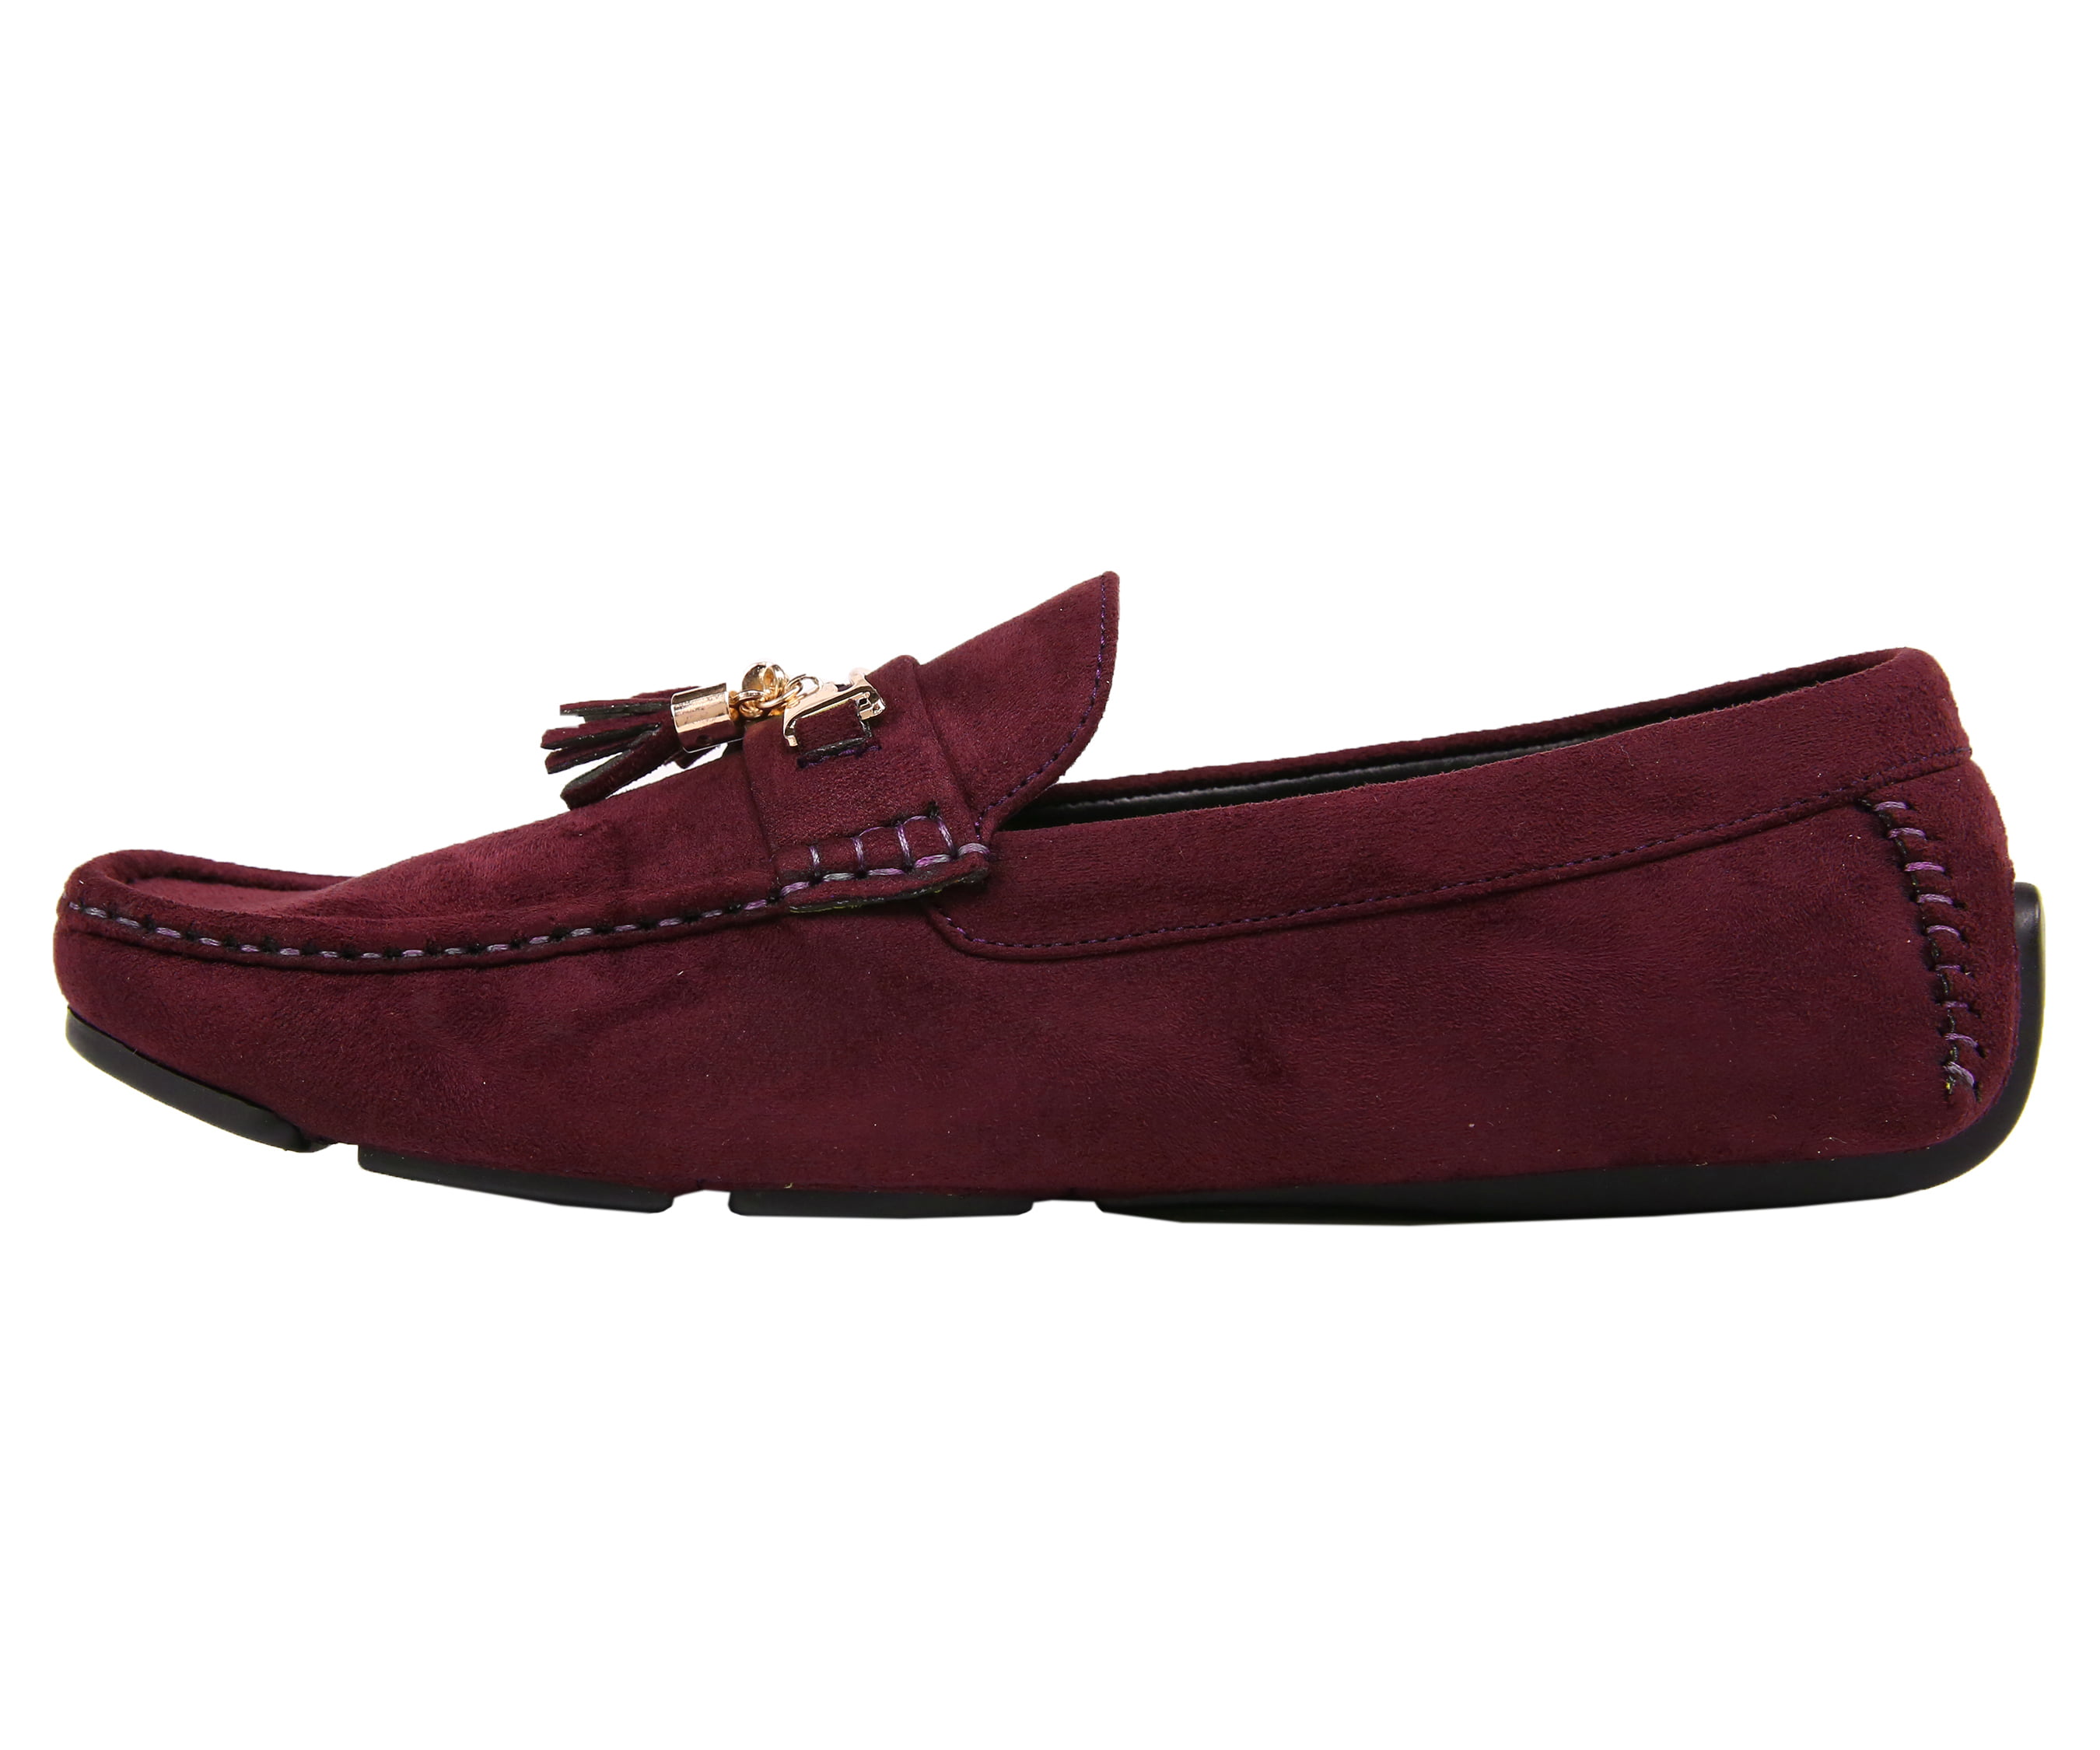 Details about   Hot New Mens Casual Faux Leather Slip on Loafers Comfort Moccasin Driving Shoes 